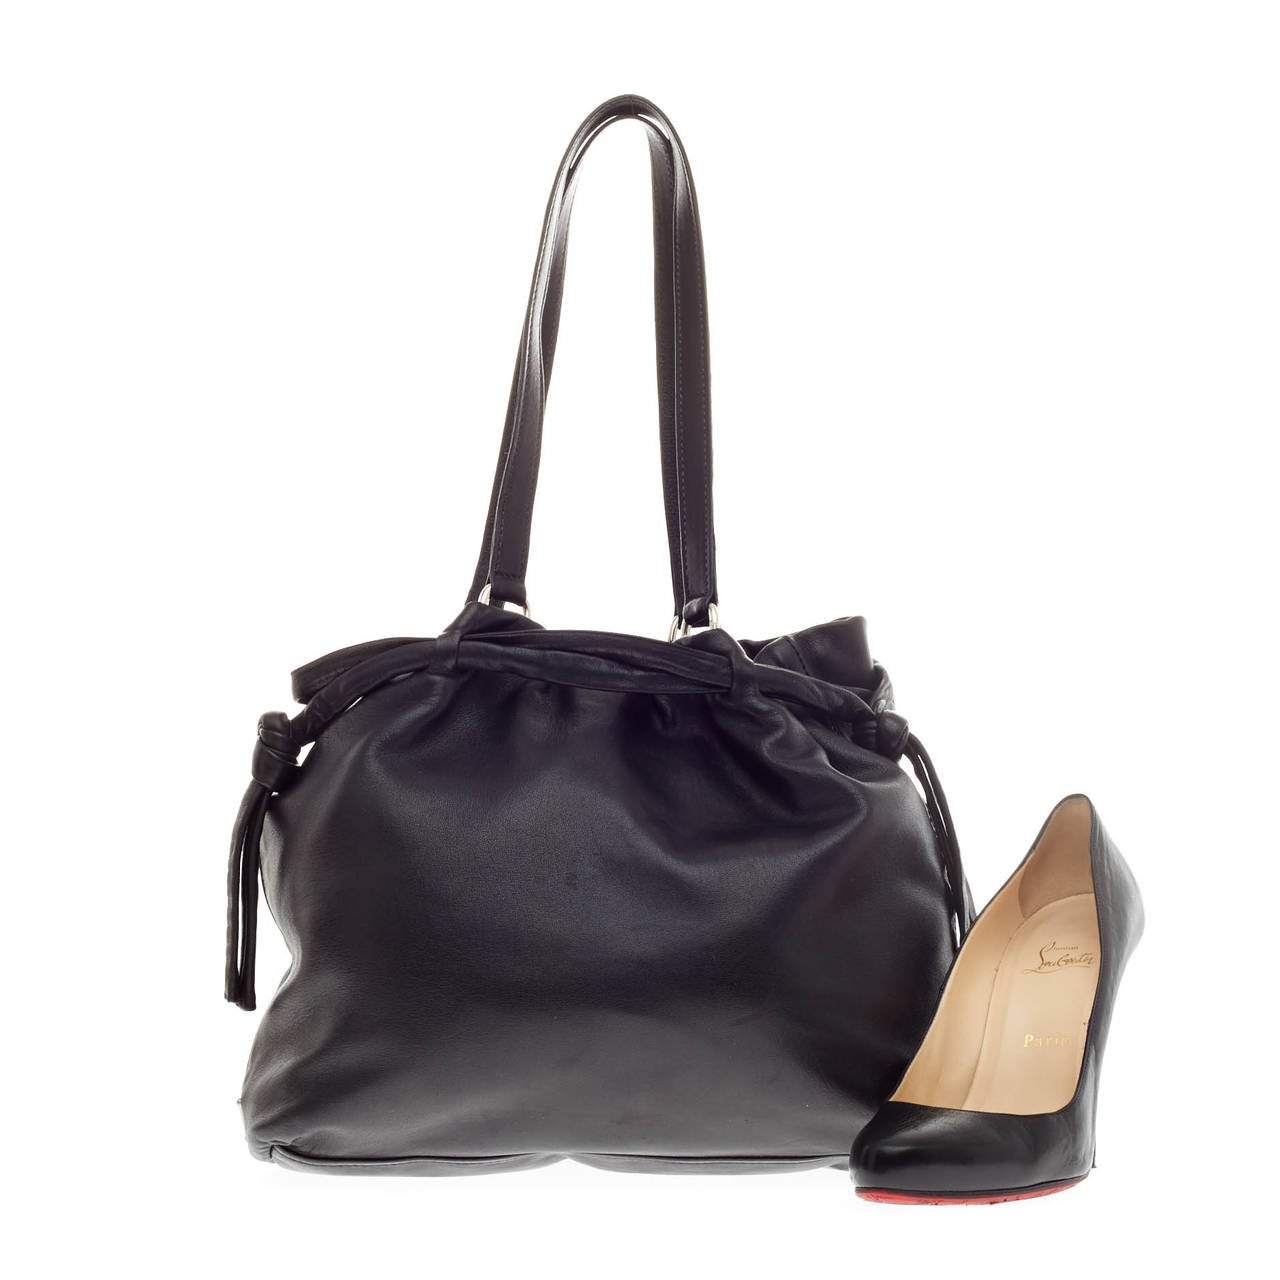 This authentic Prada Tie Side Top Tote Leather is a perfect companion for daily excursions. Crafted in soft black leather, this no-fuss tote bag features tall dual shoulder straps, tie side top detailing, side Prada triangle logo and silver-tone